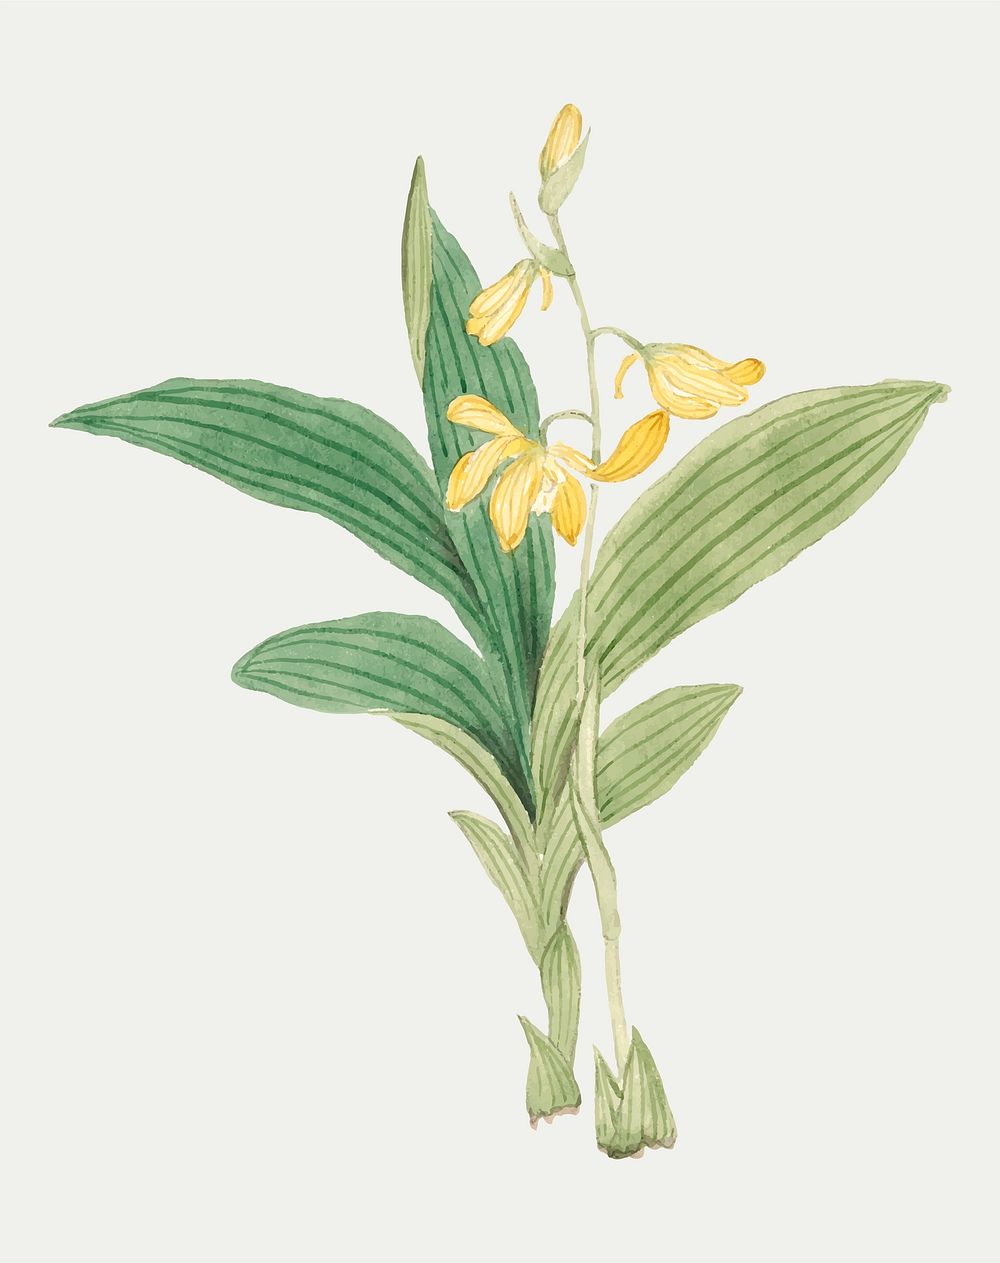 Flower vector Maxillaria Lindleyana, vintage Japanese art remix from the David Murray collection